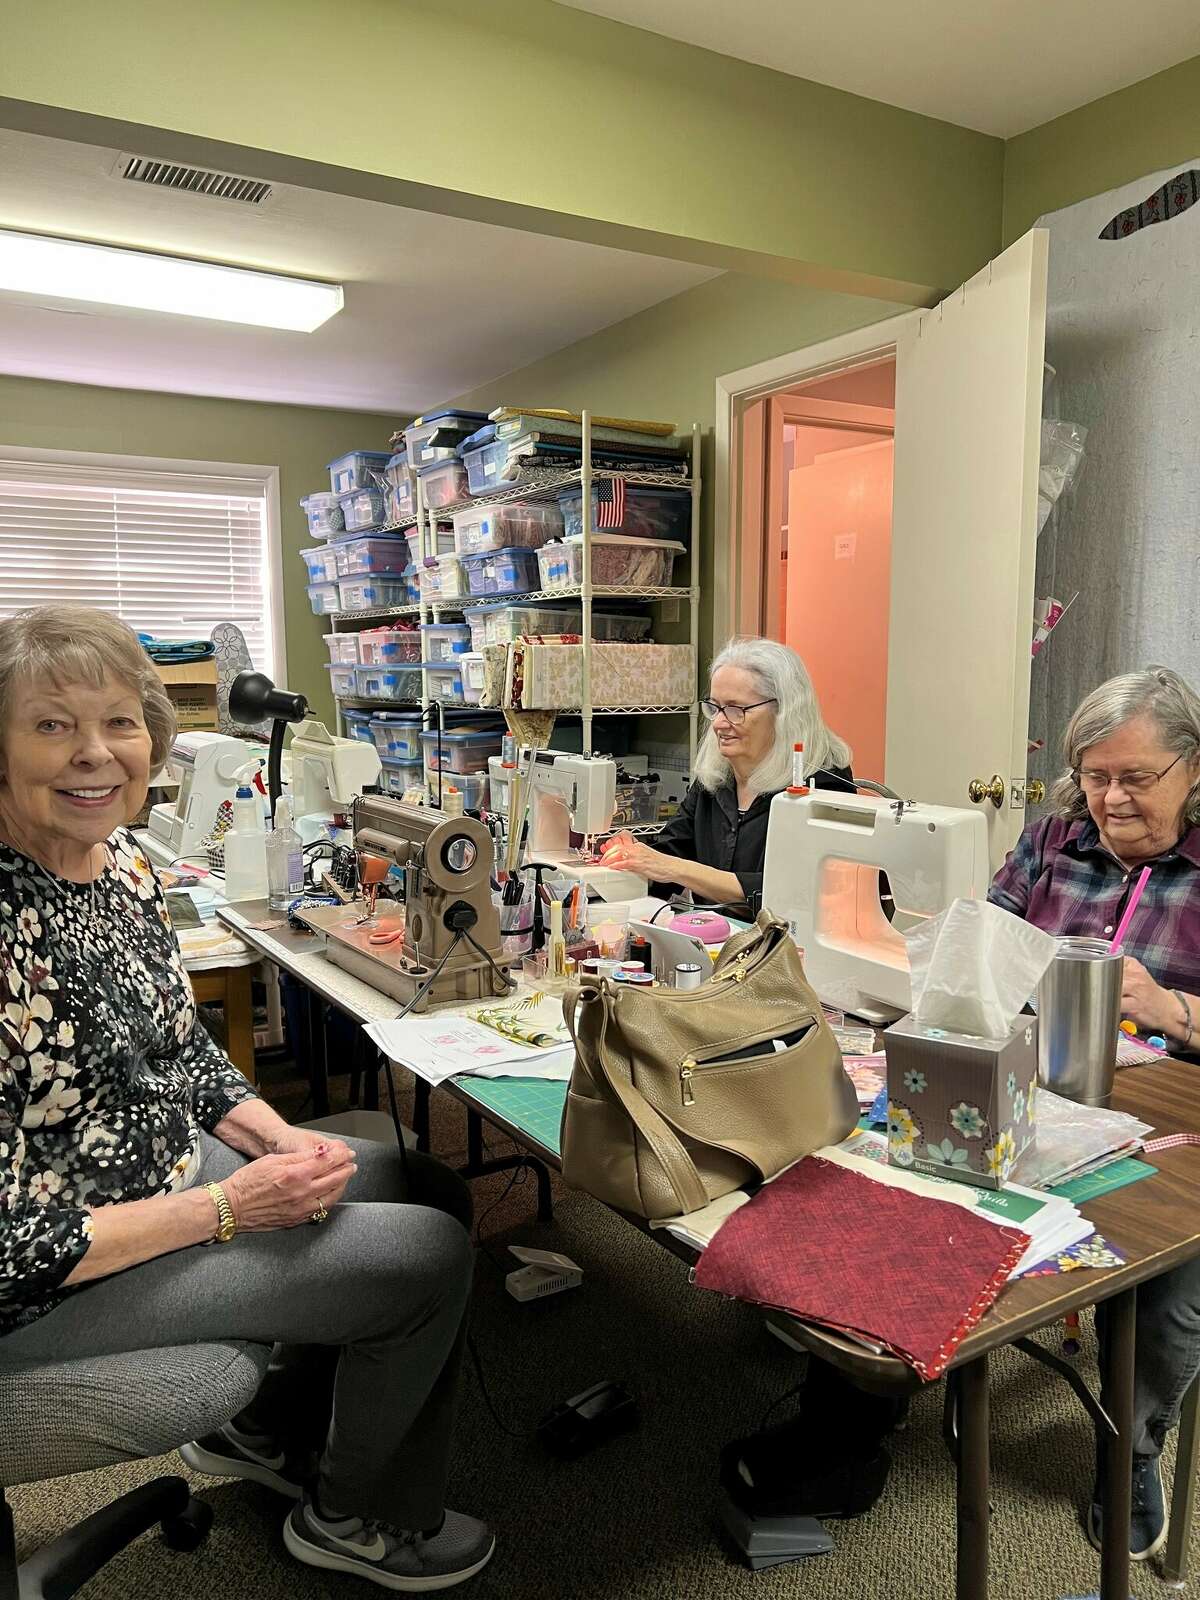 Pam Thompson, foreground, Karla Roth, background, and Kathy Hassell at work on fidget quilts in “the sweatshop” Saturday.